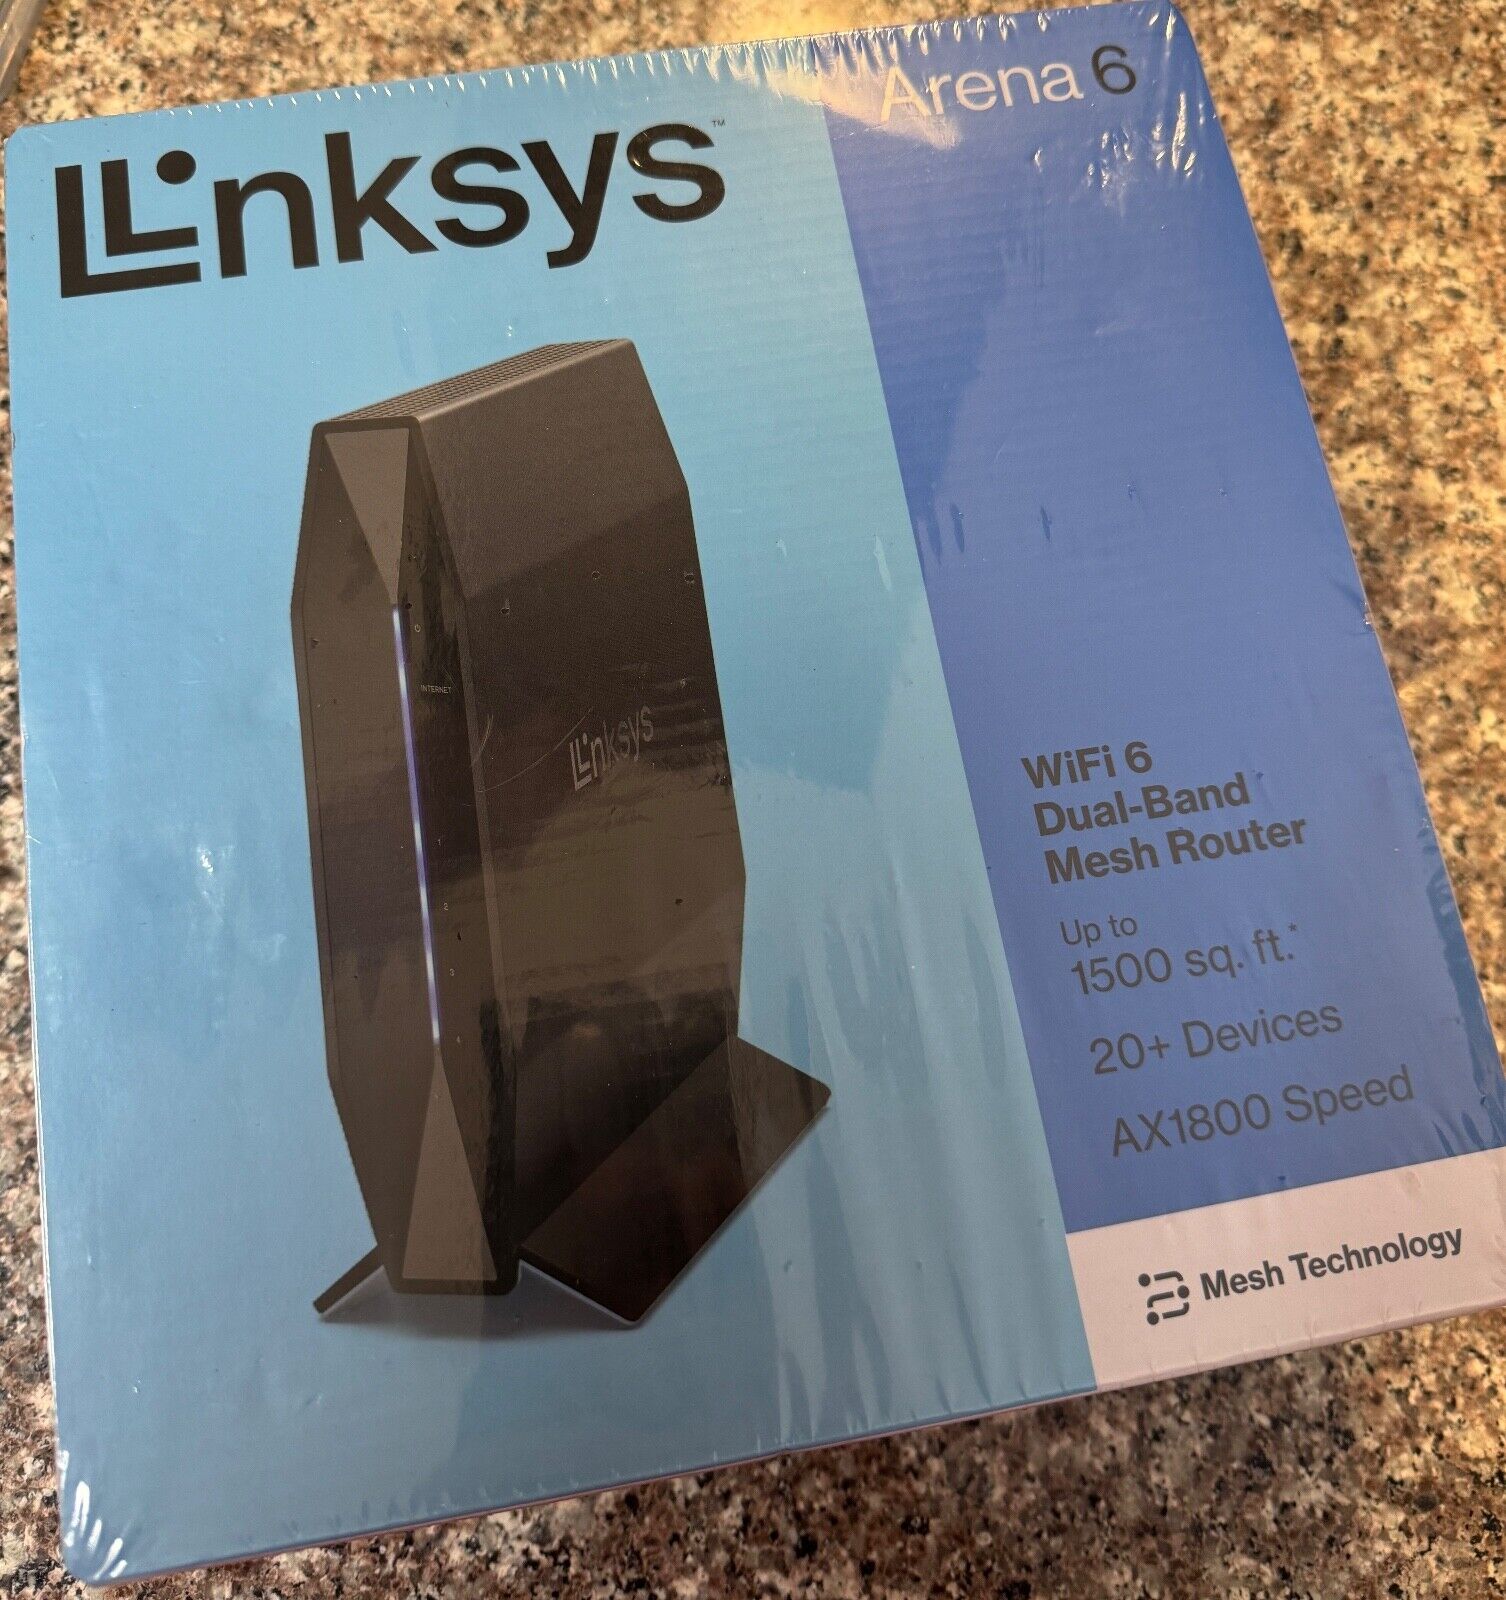 Linksys Arena 6 E7350 Dual-Band Wi-Fi 6 Router - Up to 1.8 Gbps (AX1800) - NEW